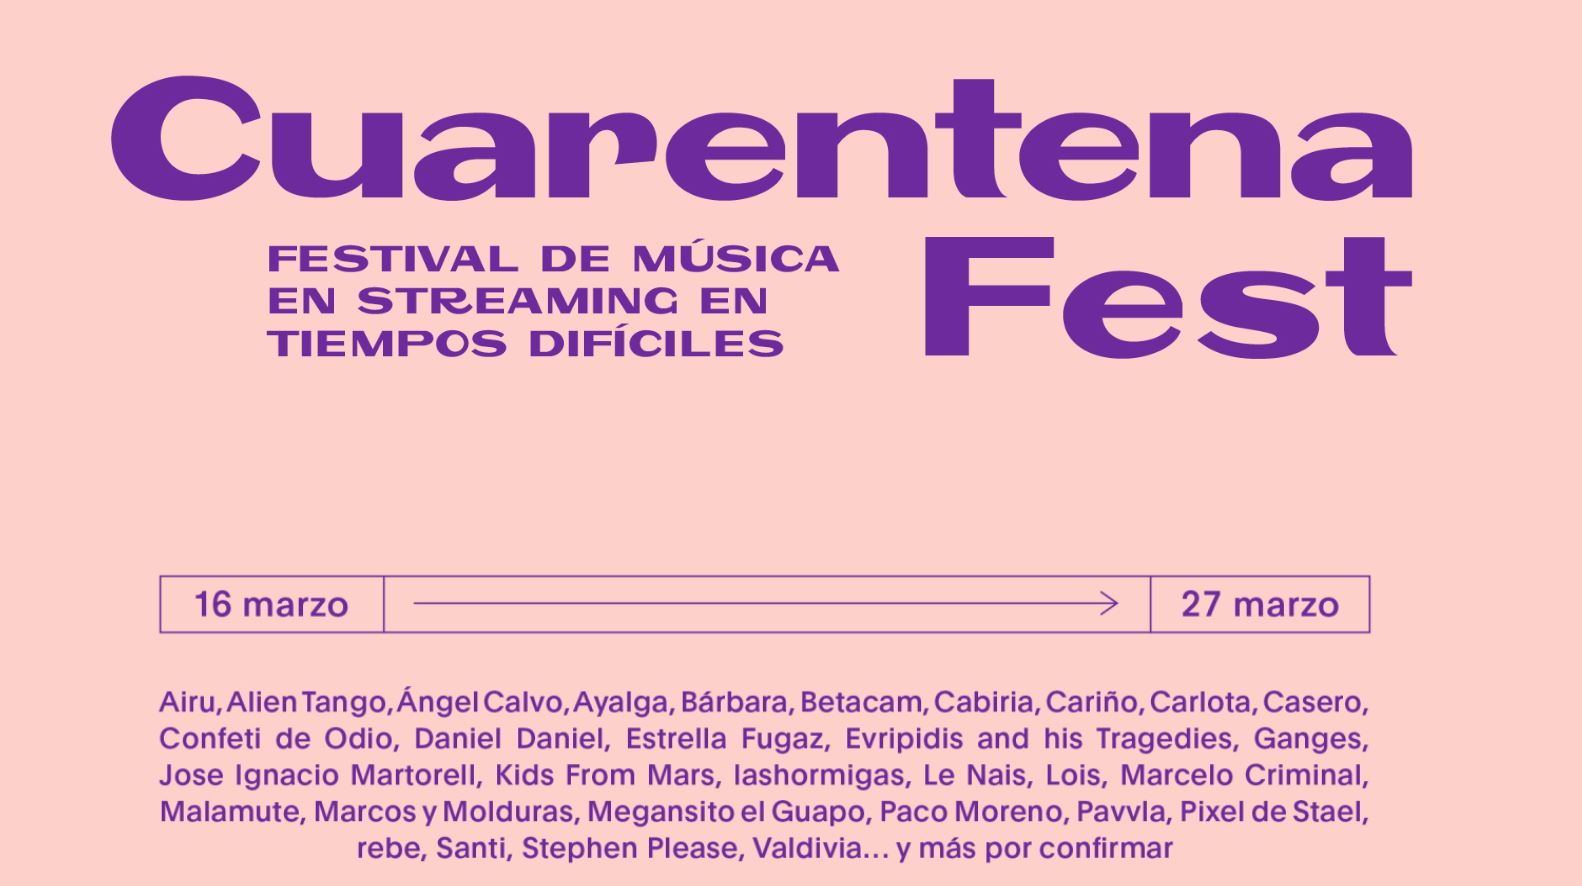 Cuarantena Fest logo, an online streaming music festival 'in difficult times' (image courtesy of Cuarantena Fest)